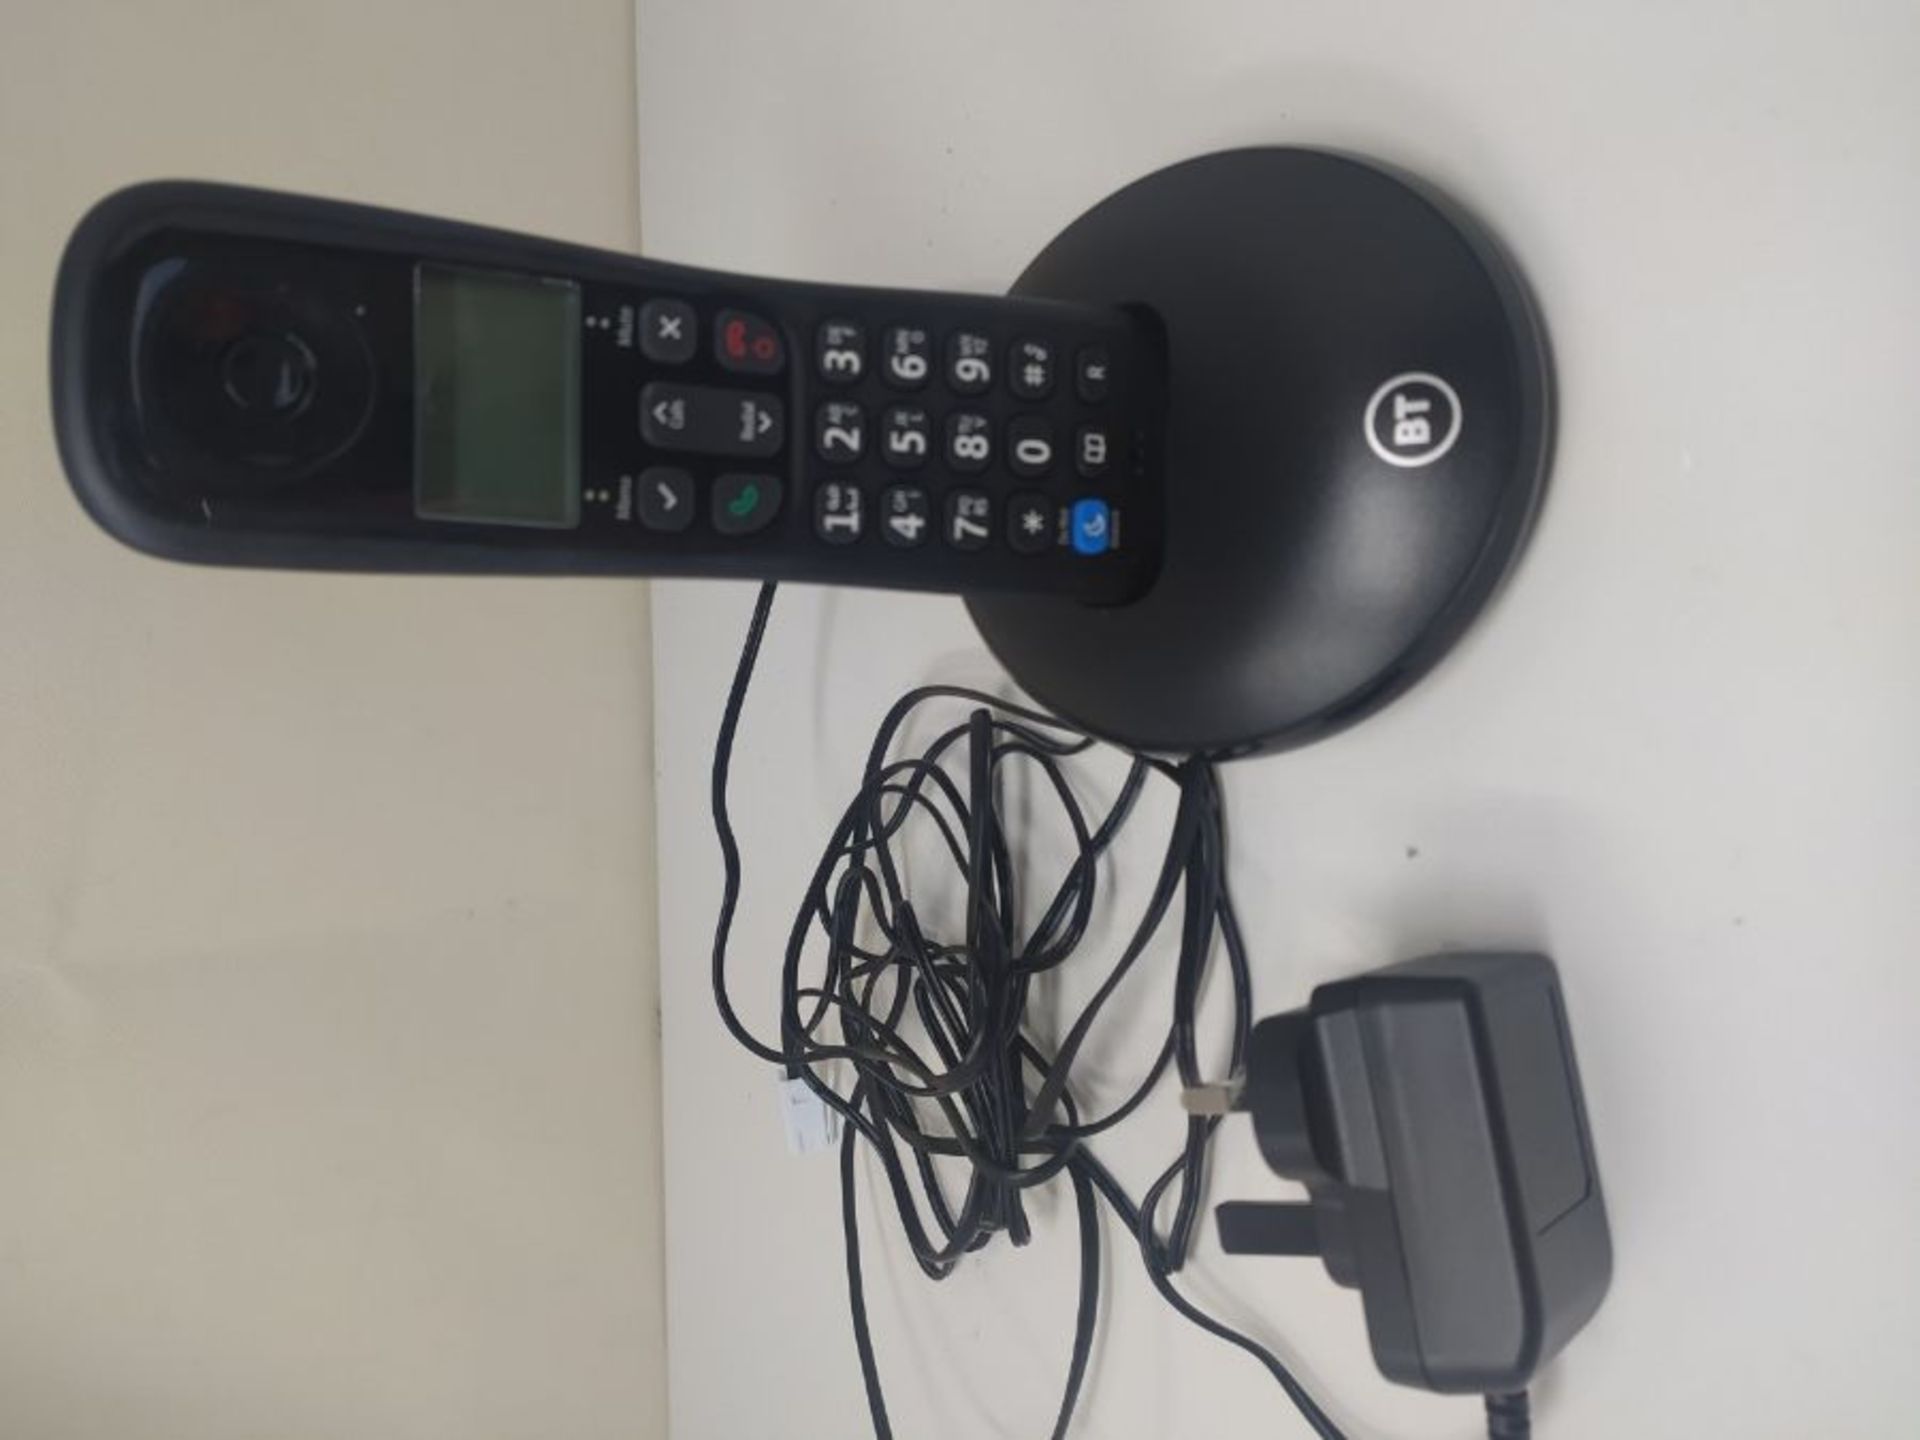 BT Everyday Cordless Home Phone with Basic Call Blocking, Single Handset Pack, Black - Image 4 of 4